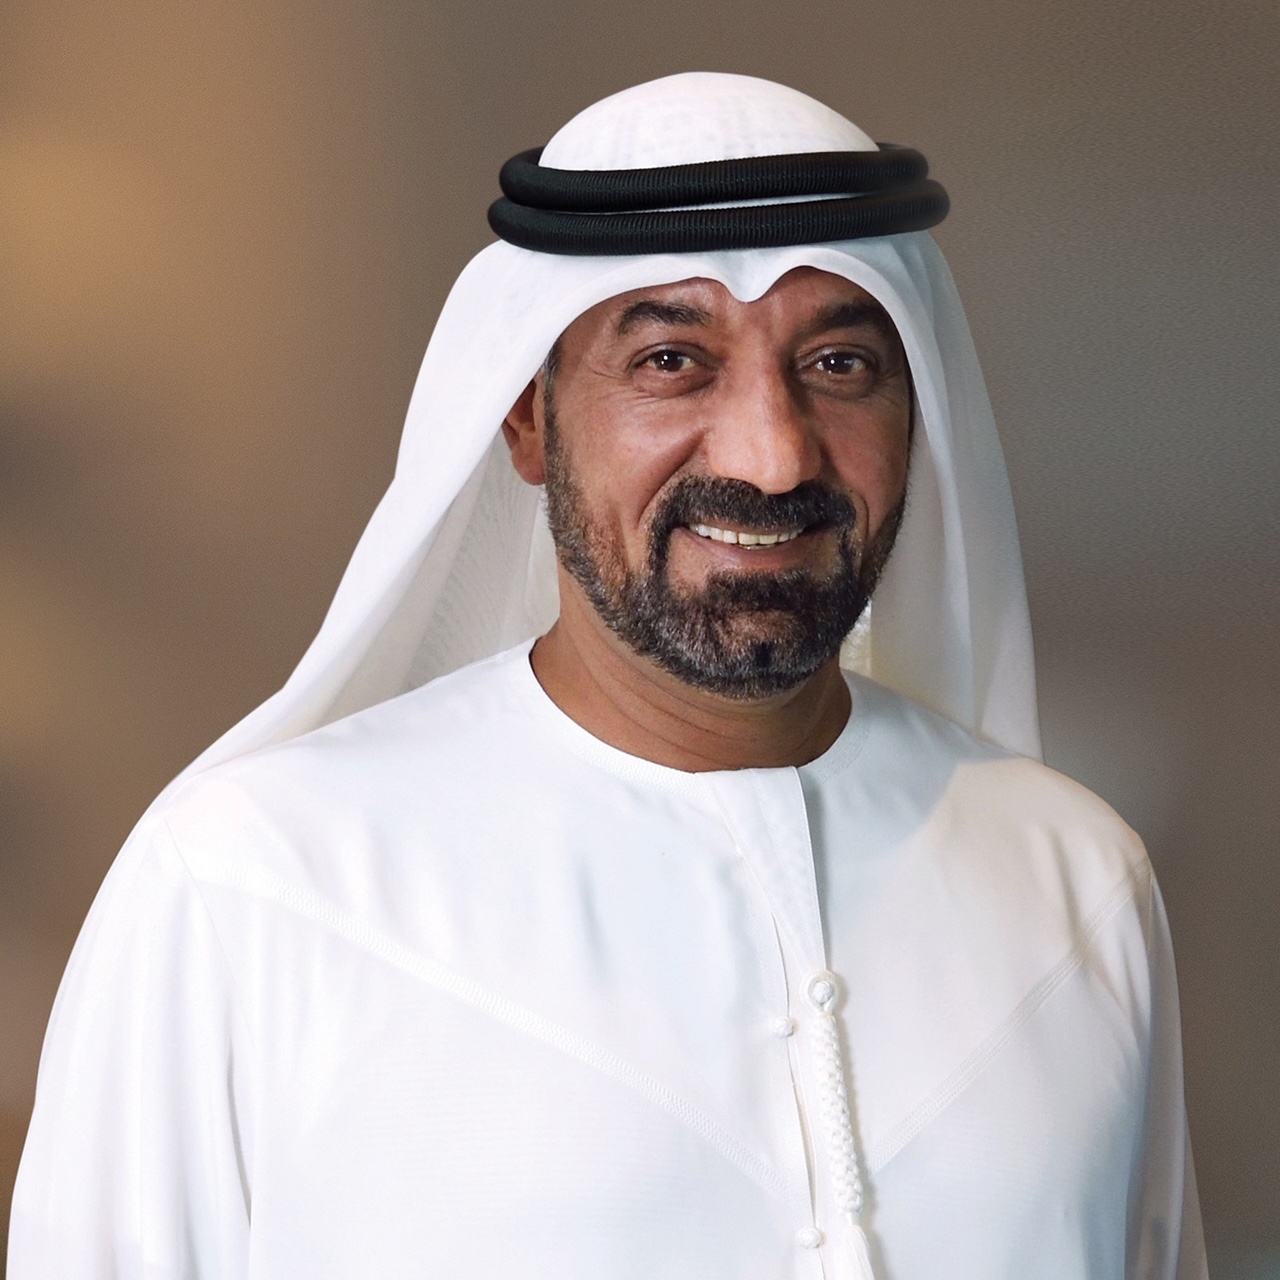 Chairman of the Emirates Airlines Group, Sheikh Ahmed bin Saeed Al Maktoum